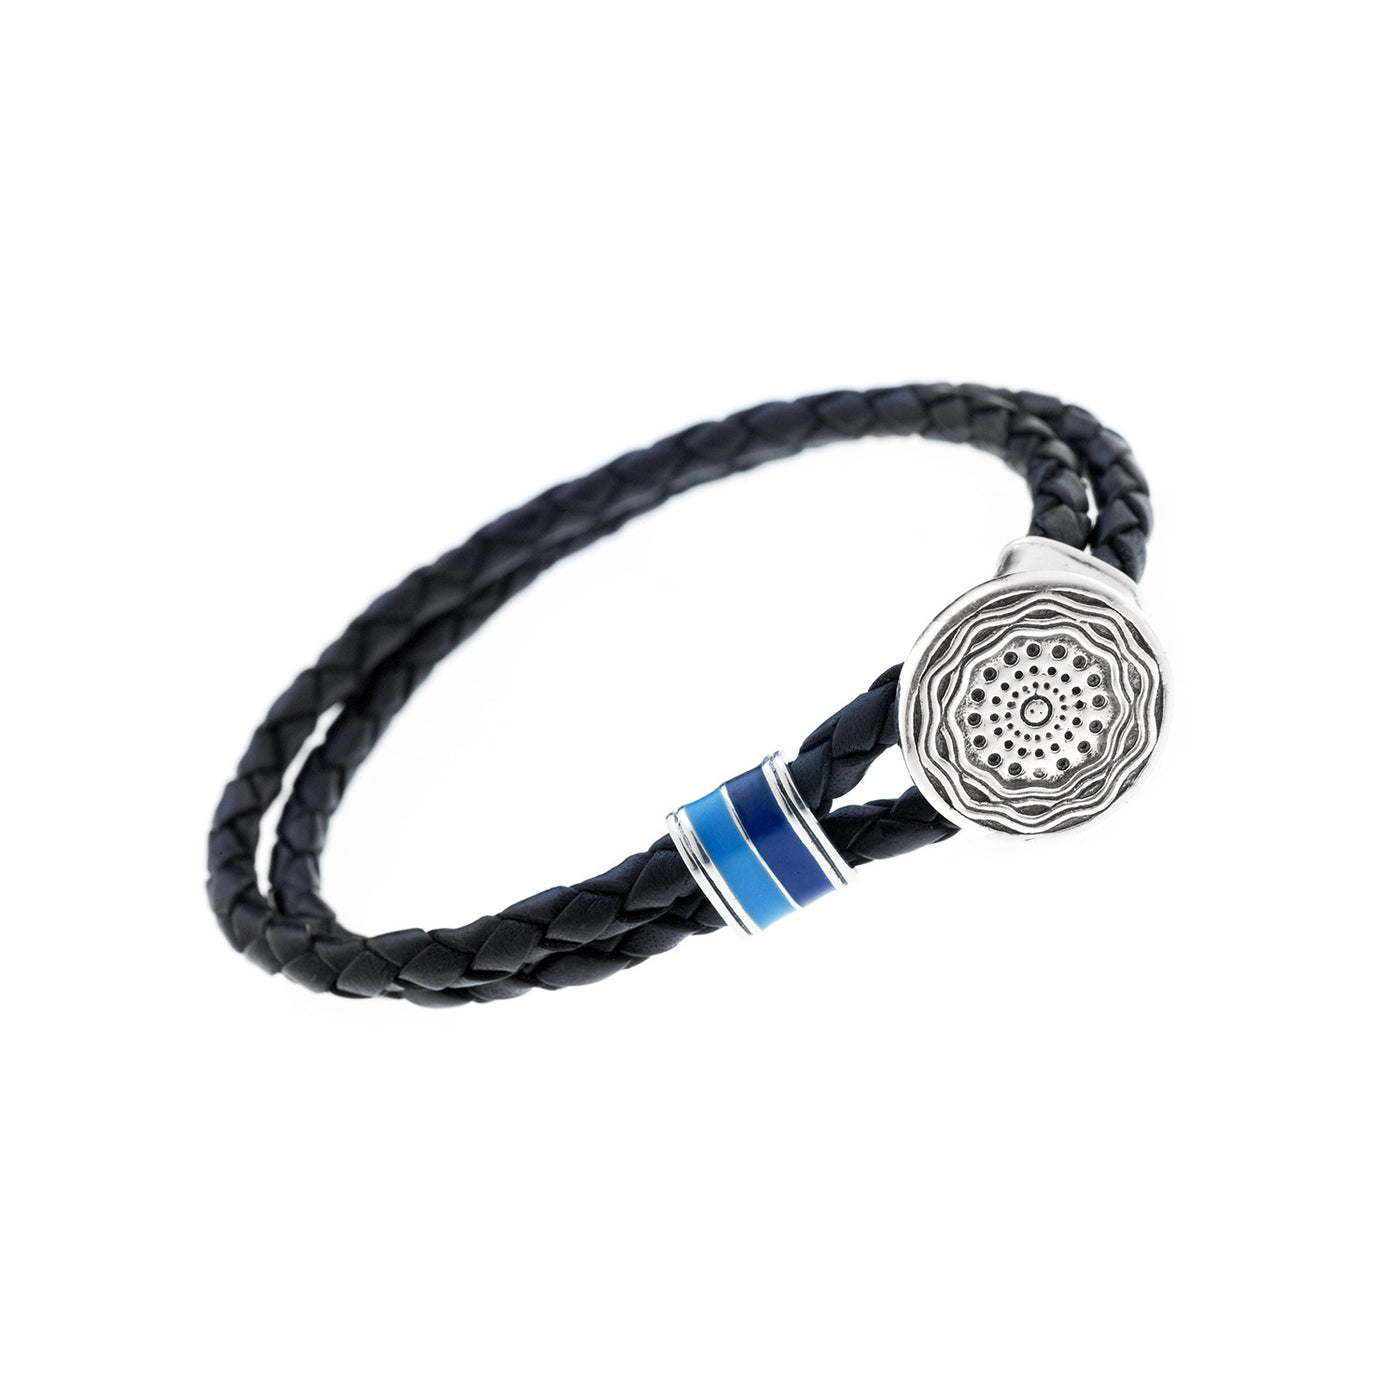 Smooth Seas Don't Make Skillful Sailors Sterling Silver & Enamel Leather Bracelet - Cynthia Gale New York Jewelry